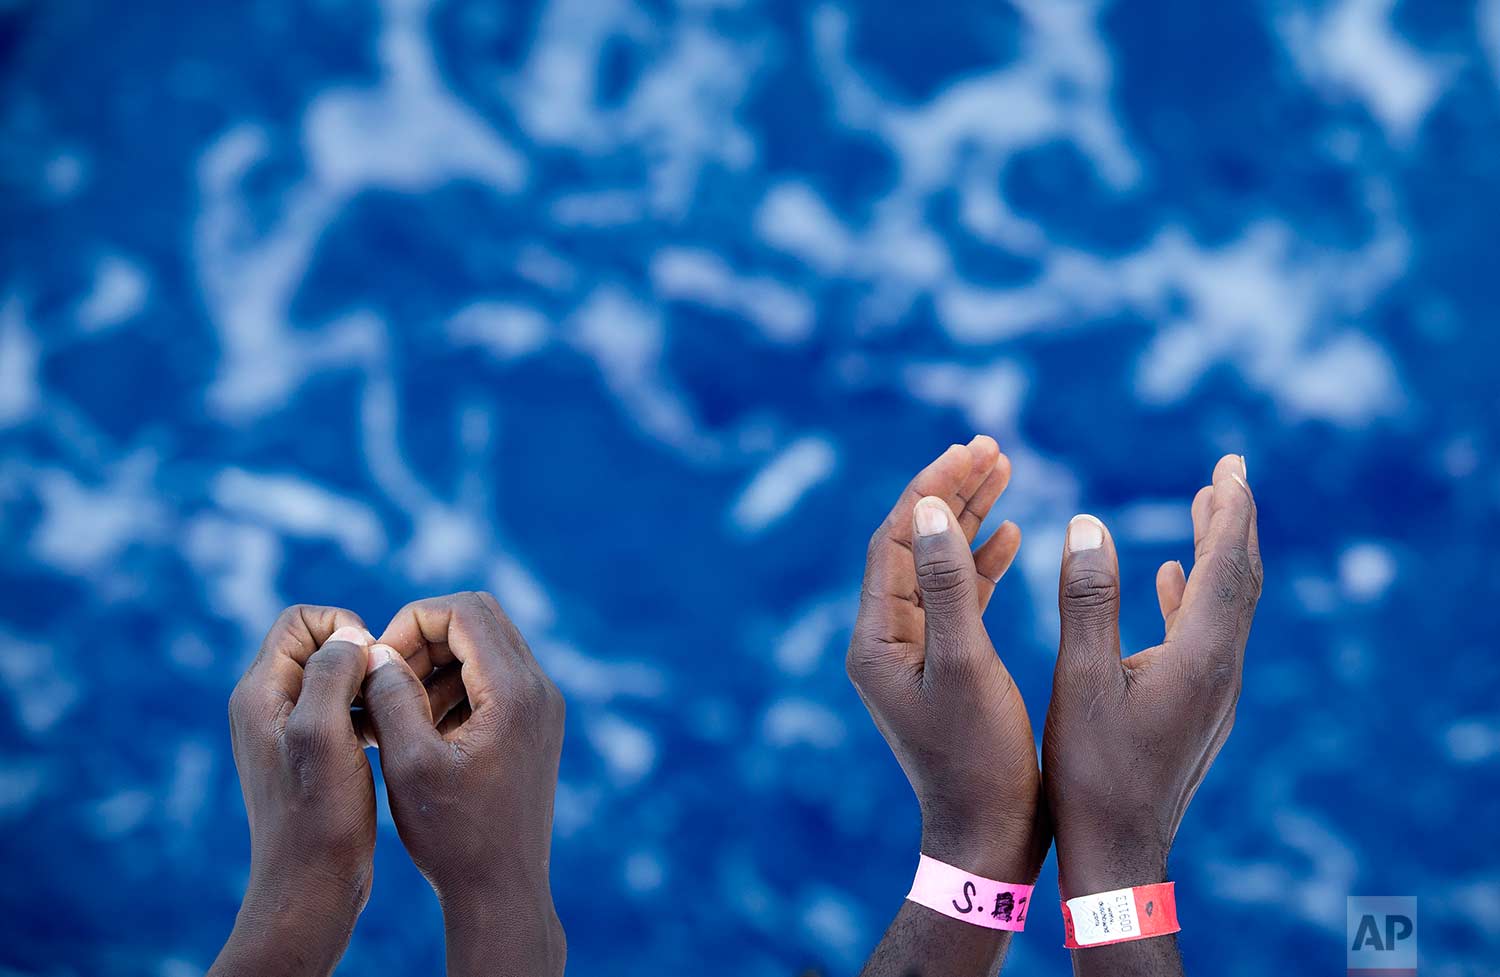  In this Thursday, Aug. 31, 2017 photo, African migrants gesture as stand on the deck of the Aquarius vessel of SOS Mediterranee and MSF (Doctors Without Borders) NGOs, in the Mediterranean Sea, southwest of Malta. 265 people rescued from the sea dur